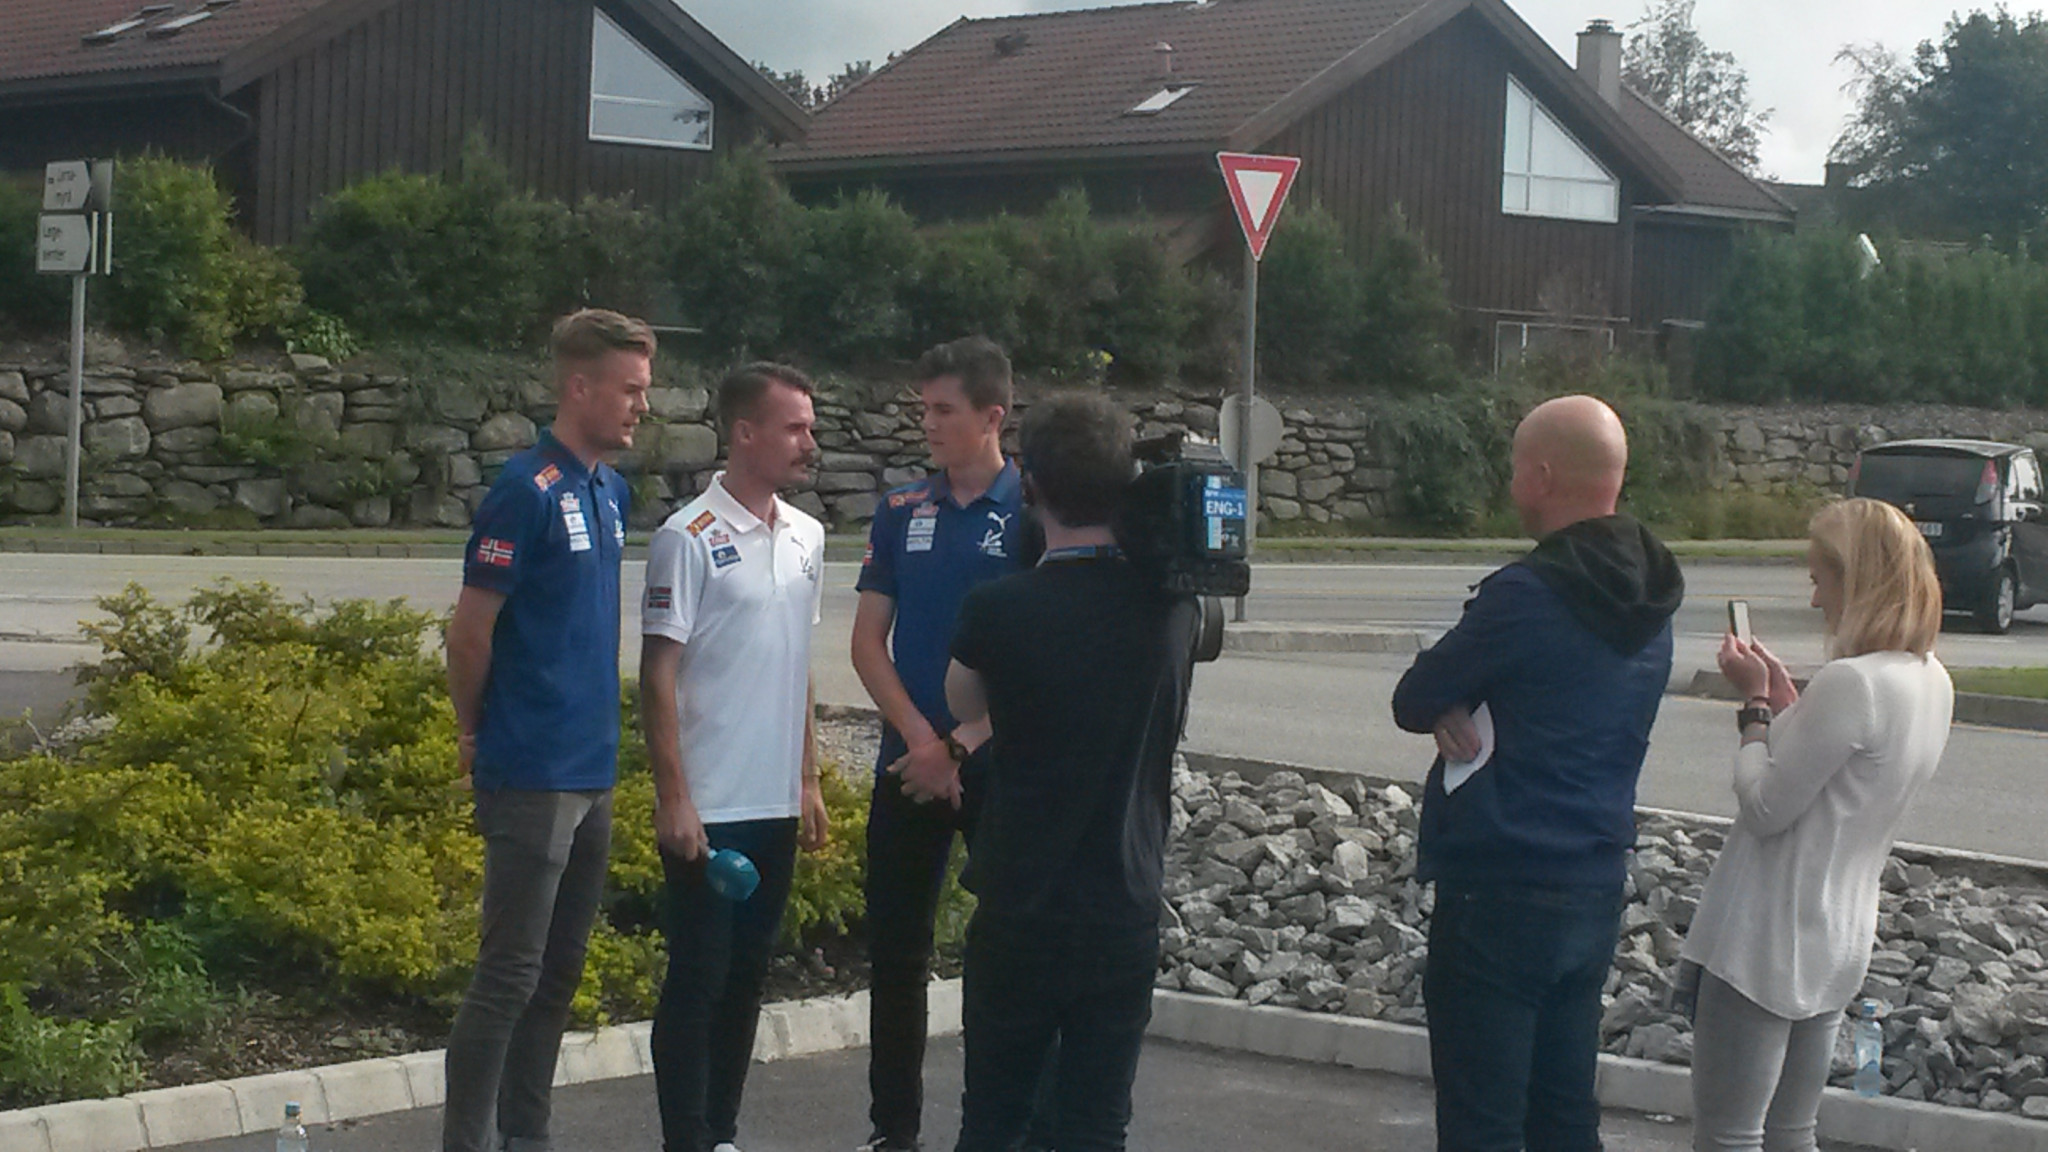 The Brothers Ingebrigtsen - from left, Filip, Henrik and Jakob - prepare to do their thing for Norwegian TV ©ITG